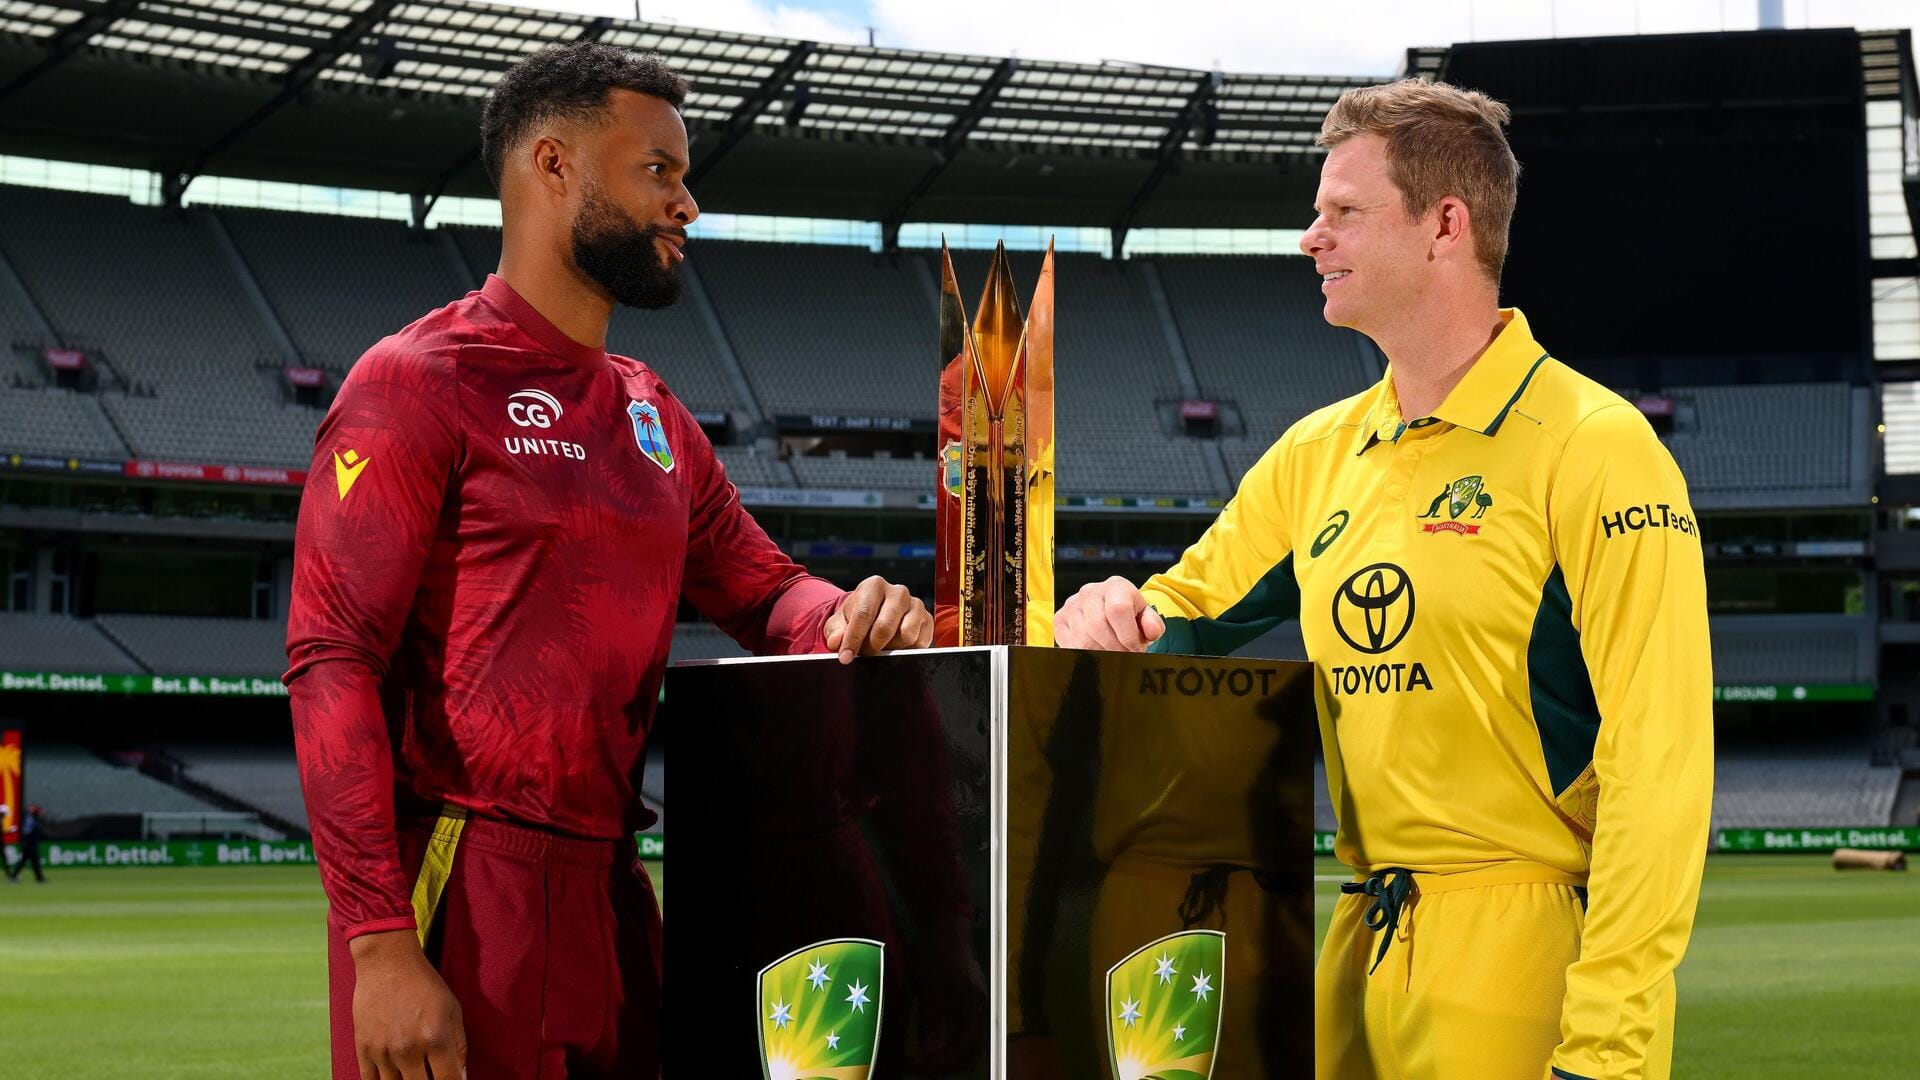 Steve Smith averages 71.20 versus West Indies in ODIs: Stats